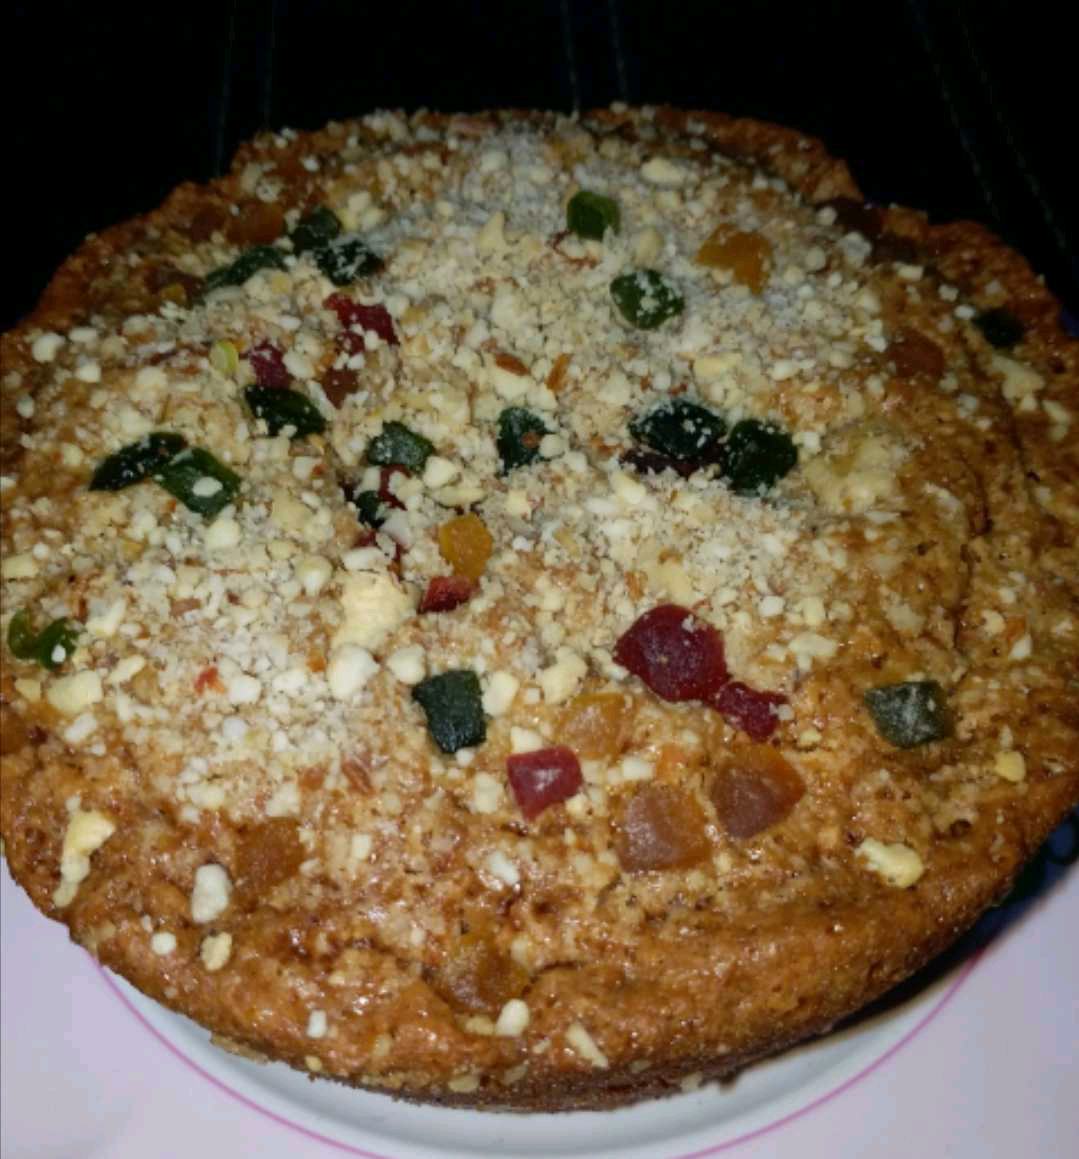 Dryfruit Cake Loaded With Cherries...